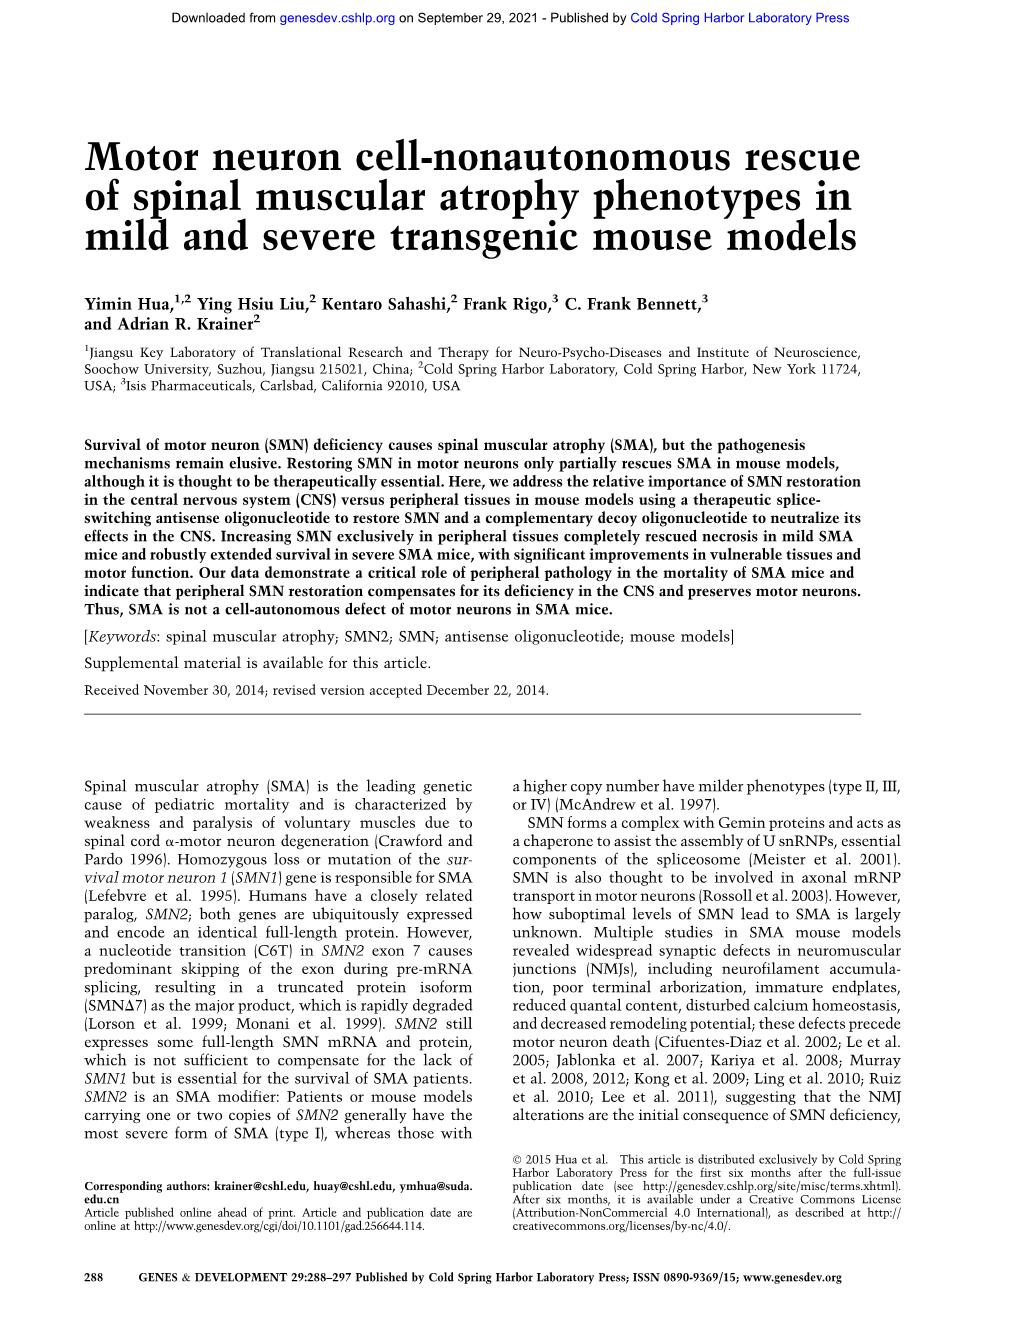 Motor Neuron Cell-Nonautonomous Rescue of Spinal Muscular Atrophy Phenotypes in Mild and Severe Transgenic Mouse Models